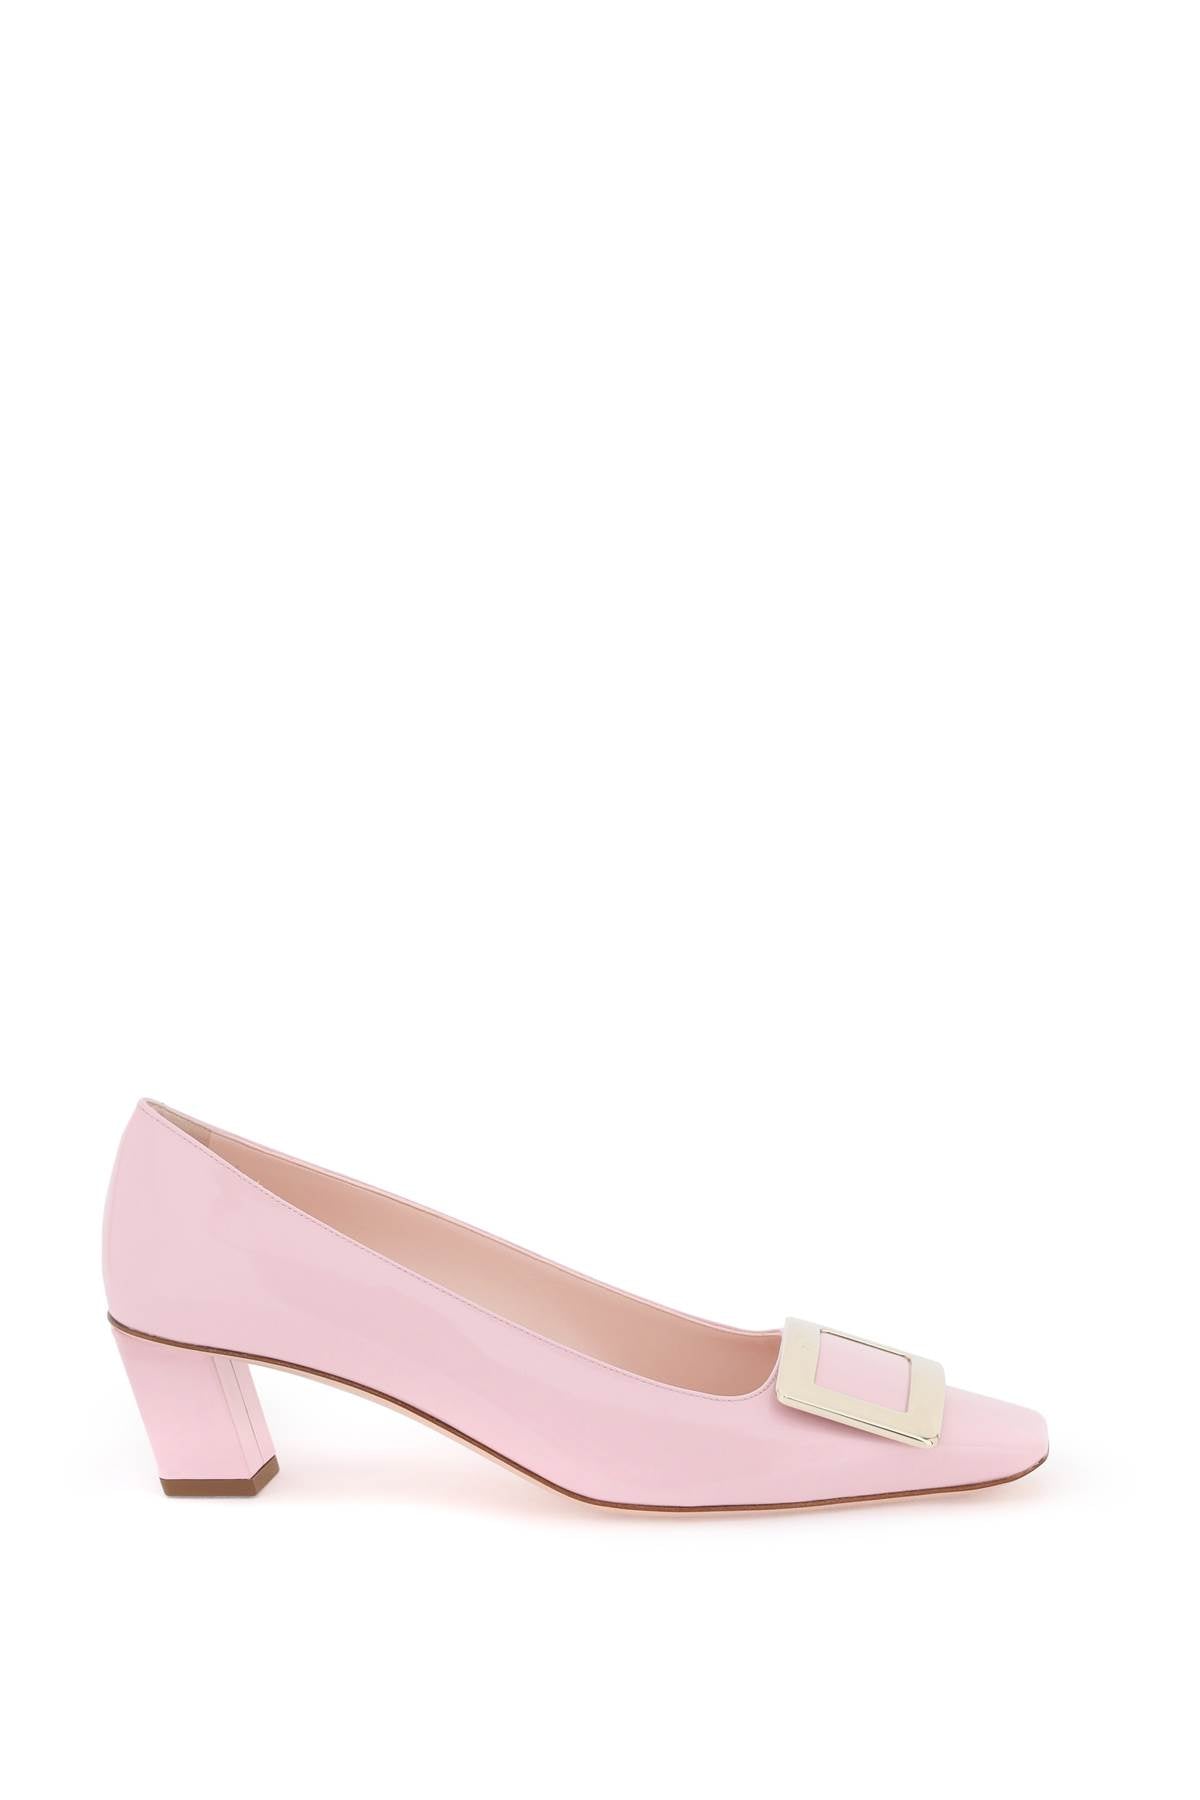 ROGER VIVIER Stunning Pink Patent Leather Pumps with Iconic Gold-Tone Square Buckle for Women